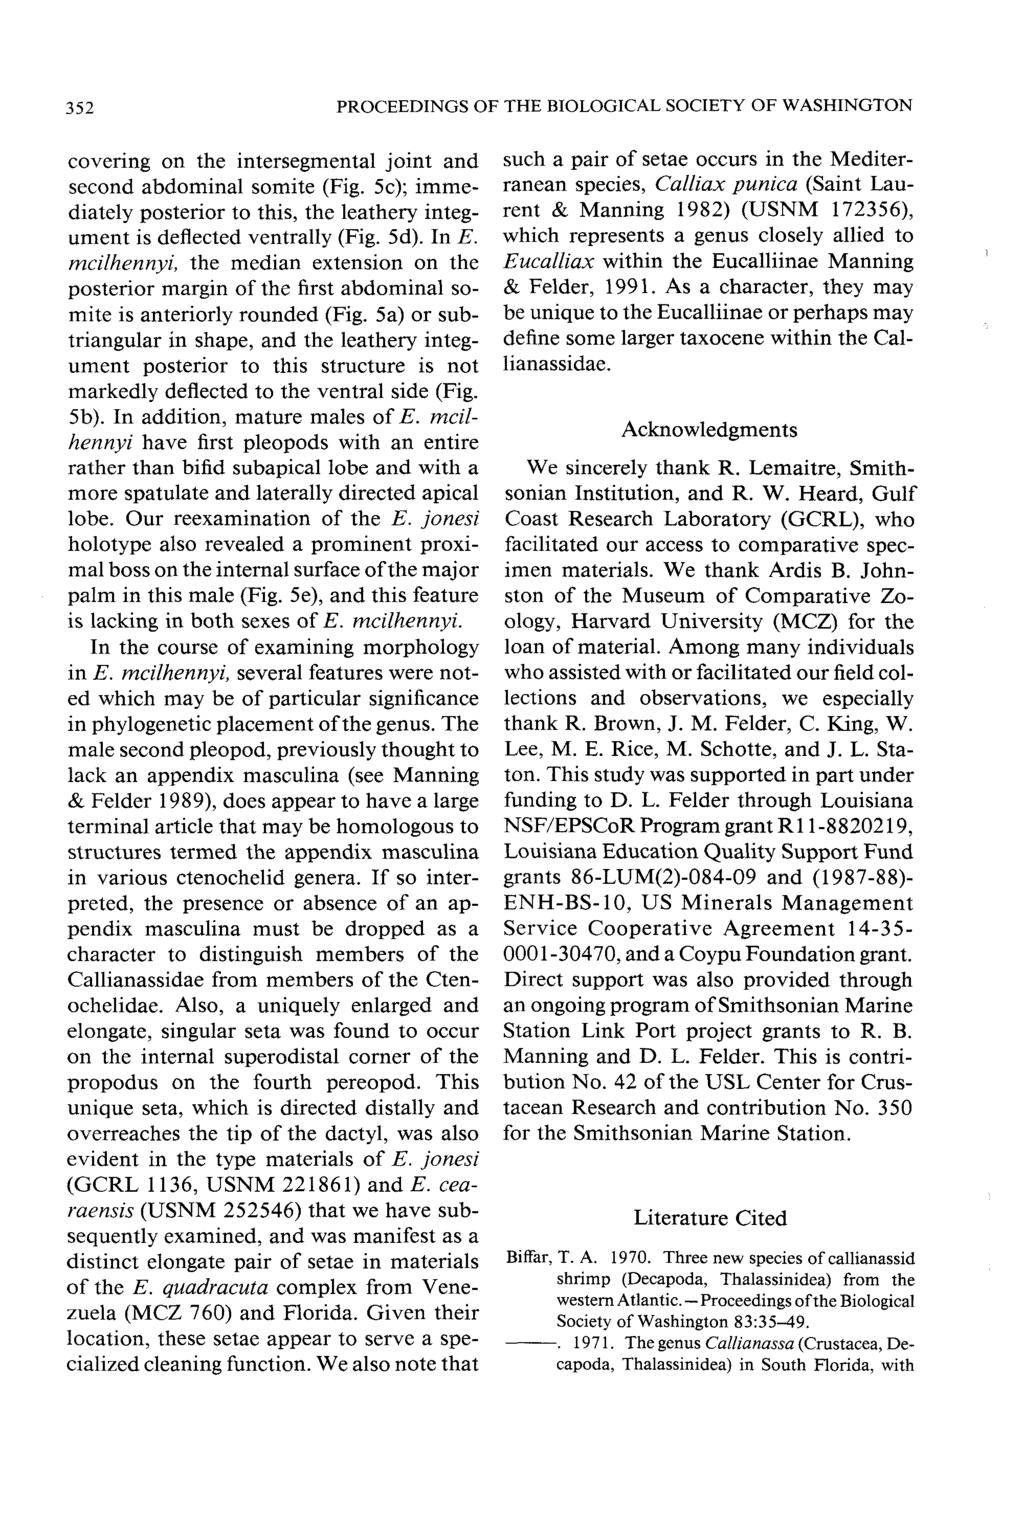 352 PROCEEDINGS OF THE BIOLOGICAL SOCIETY OF WASHINGTON covering on the intersegmental joint and second abdominal somite (Fig.